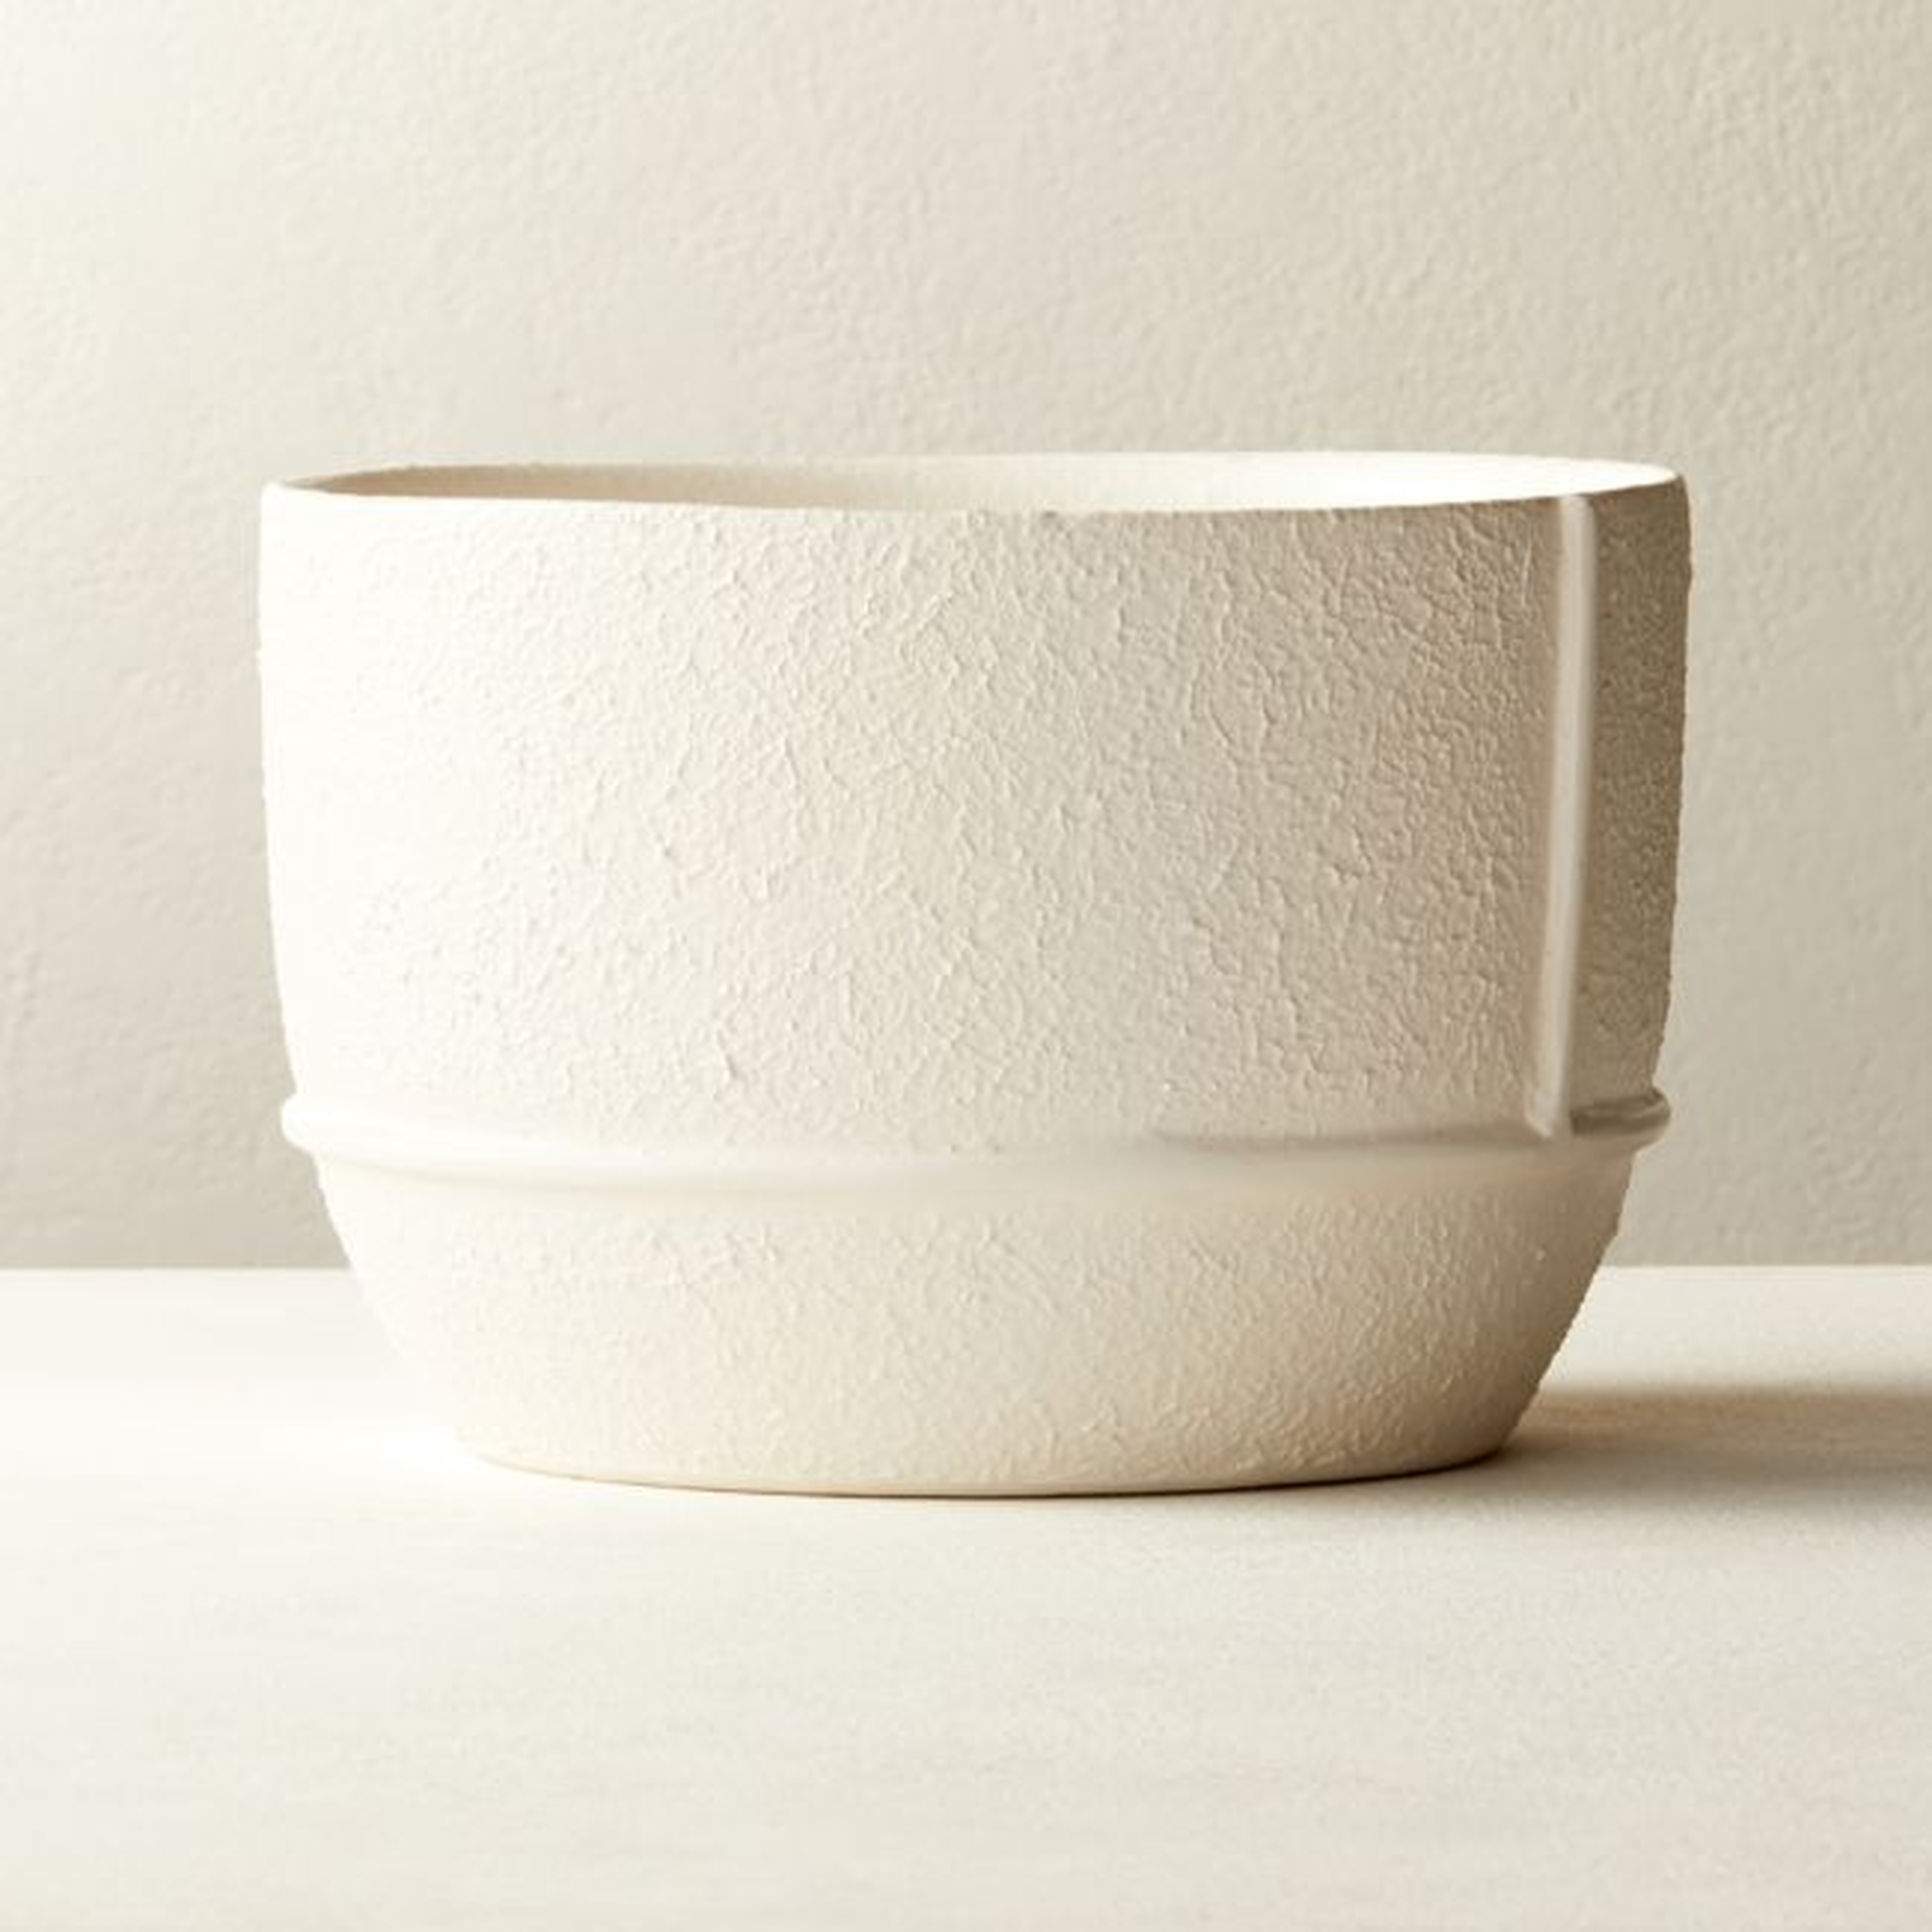 Theory Textured Planter, White, Large - CB2